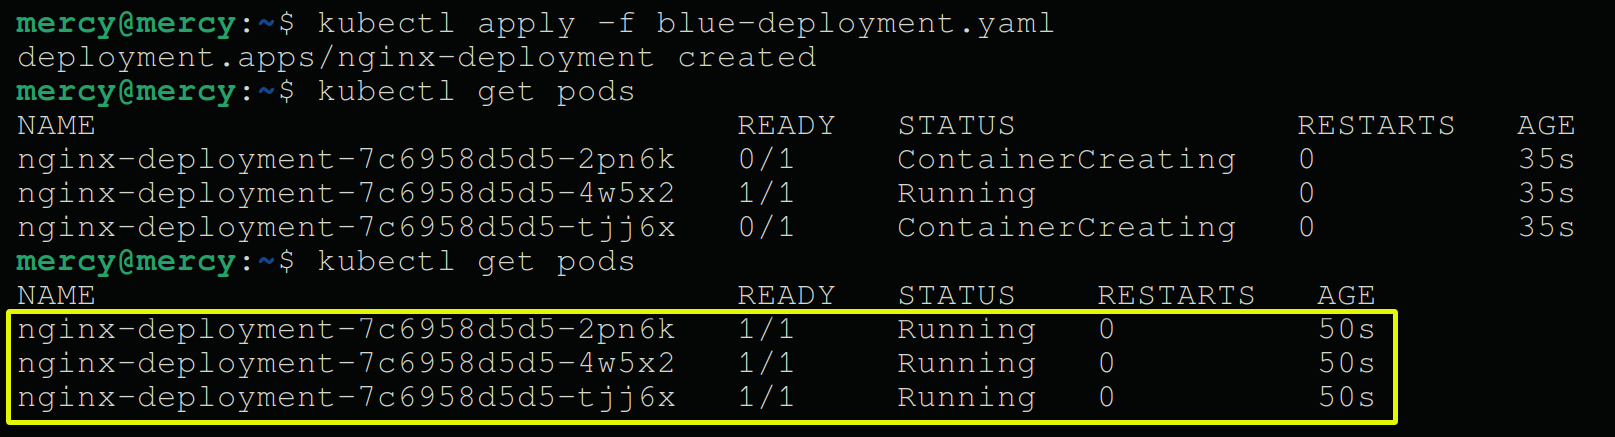 Creating deployment and verifying the status of pods in Kubernetes 